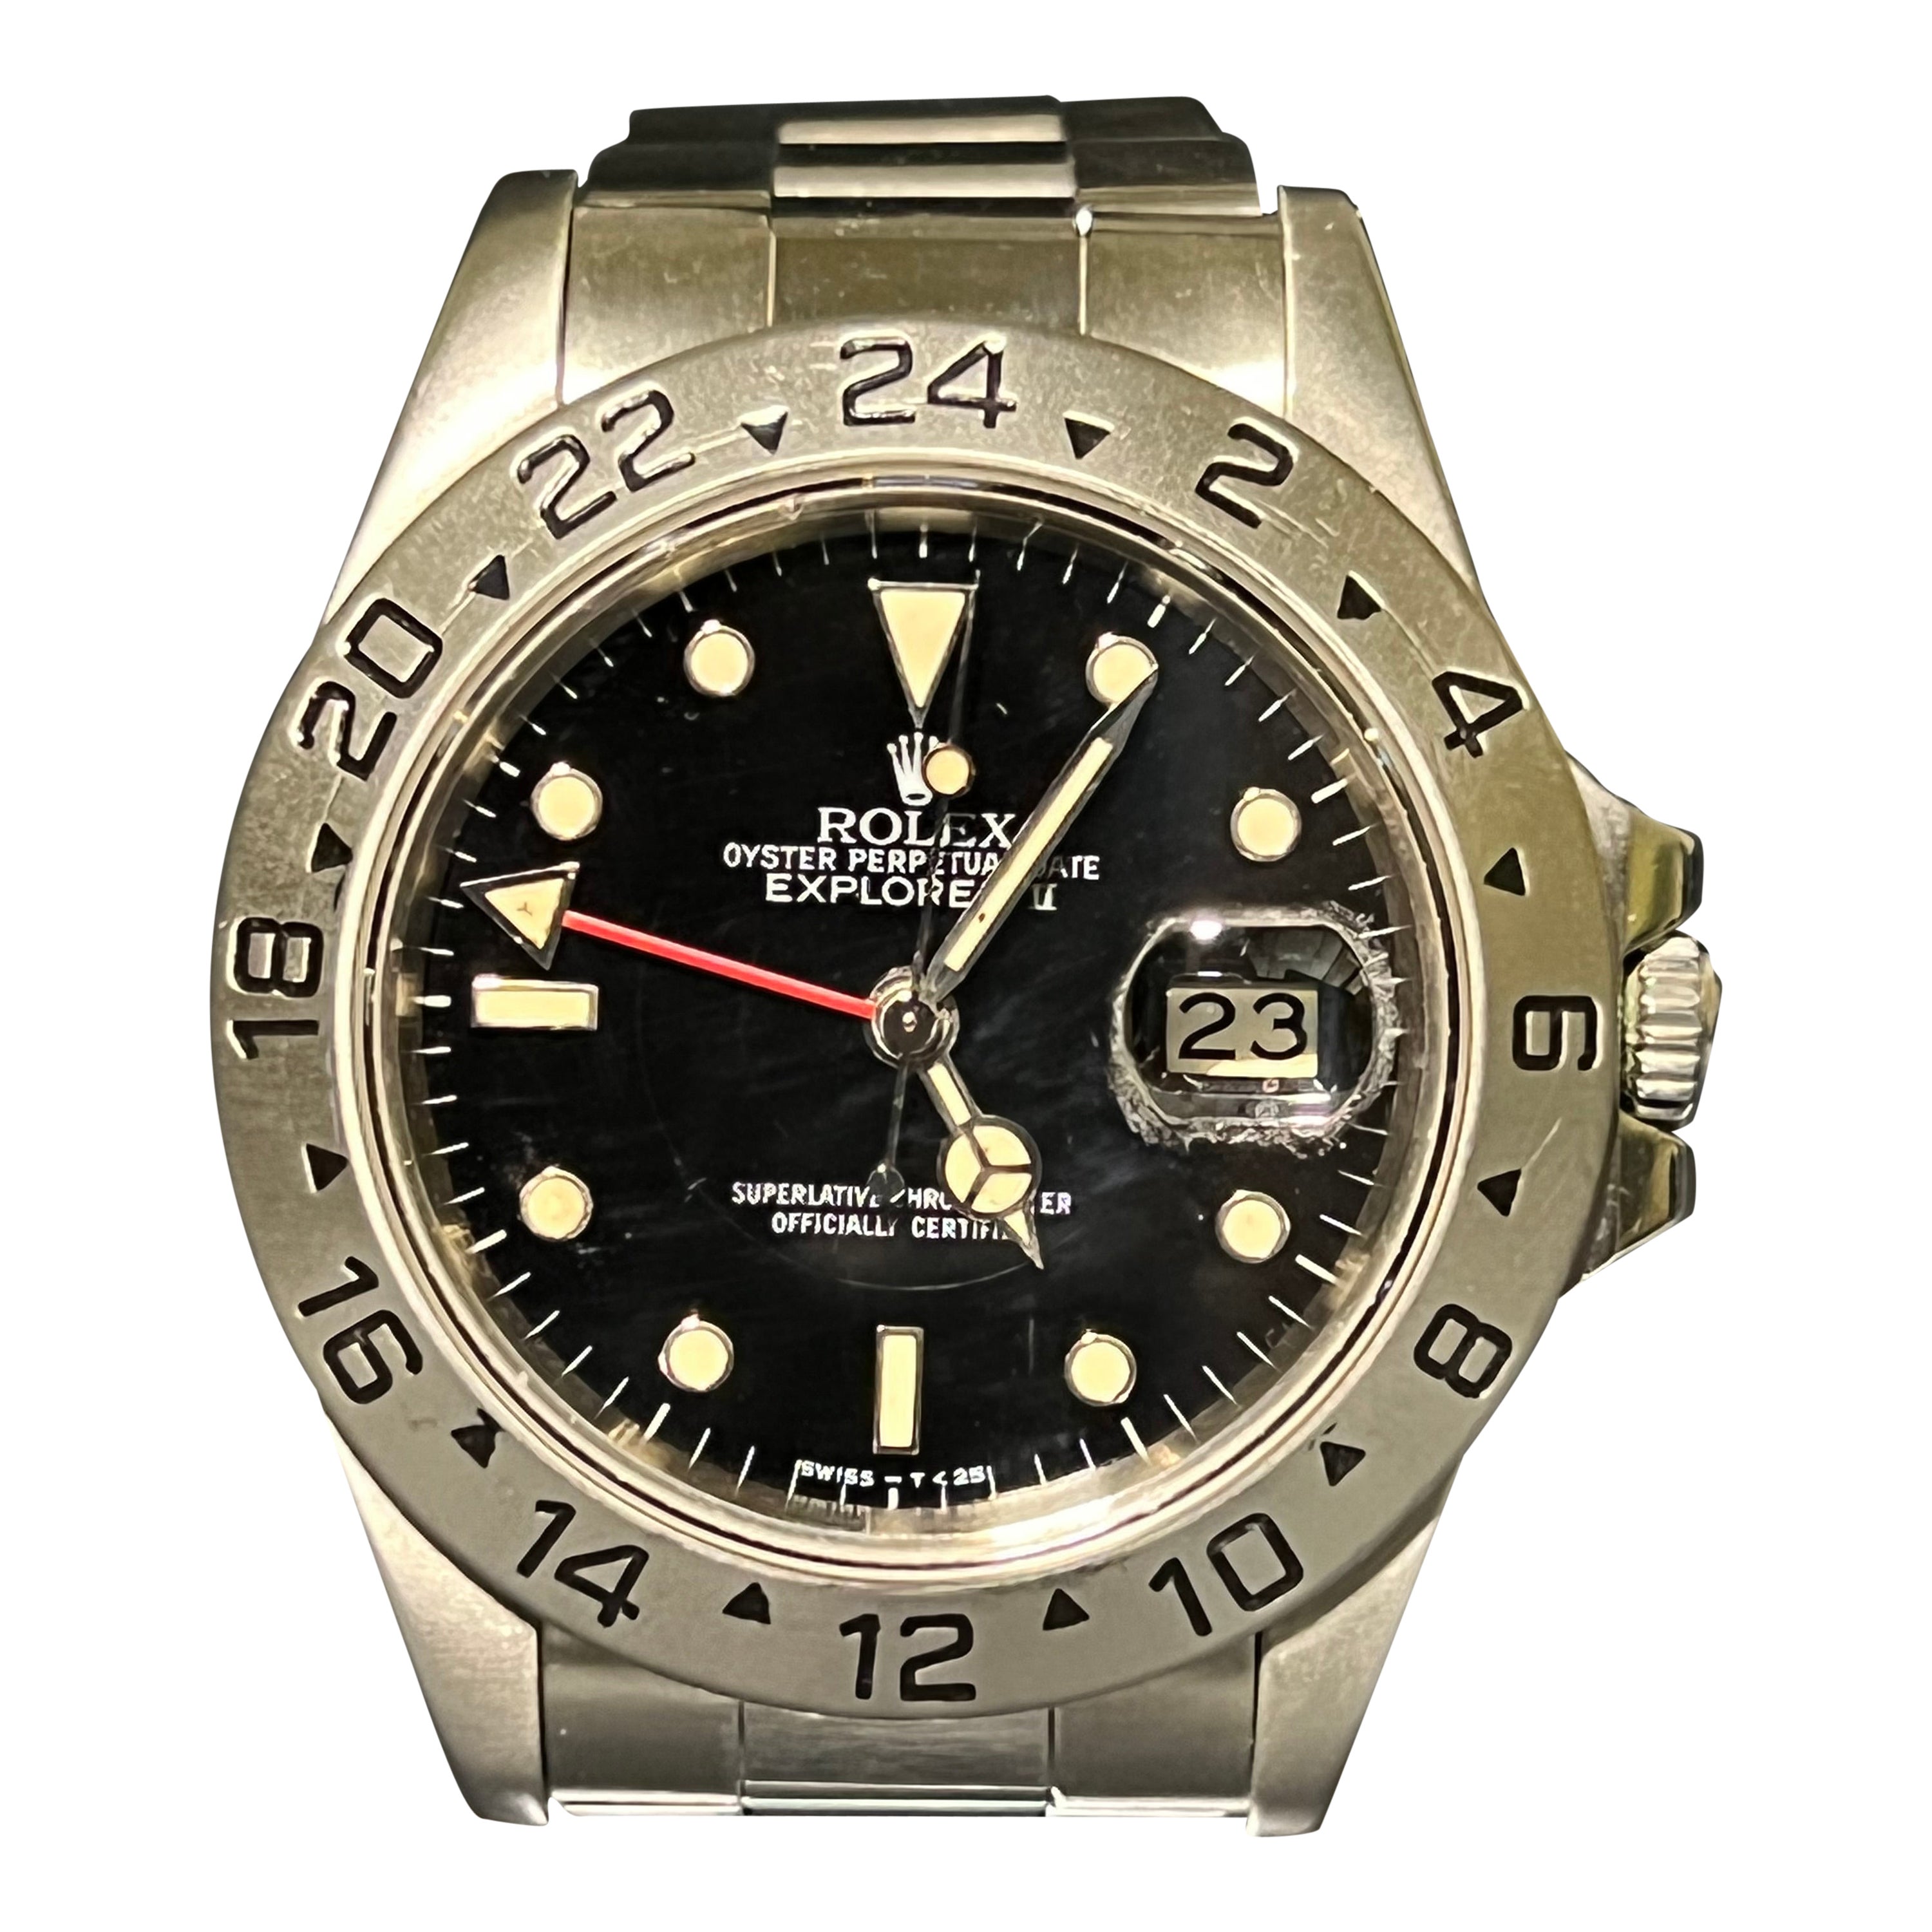 1984 Rolex Explorer II 16550 Black Dial Stainless Steel Wristwatch For Sale